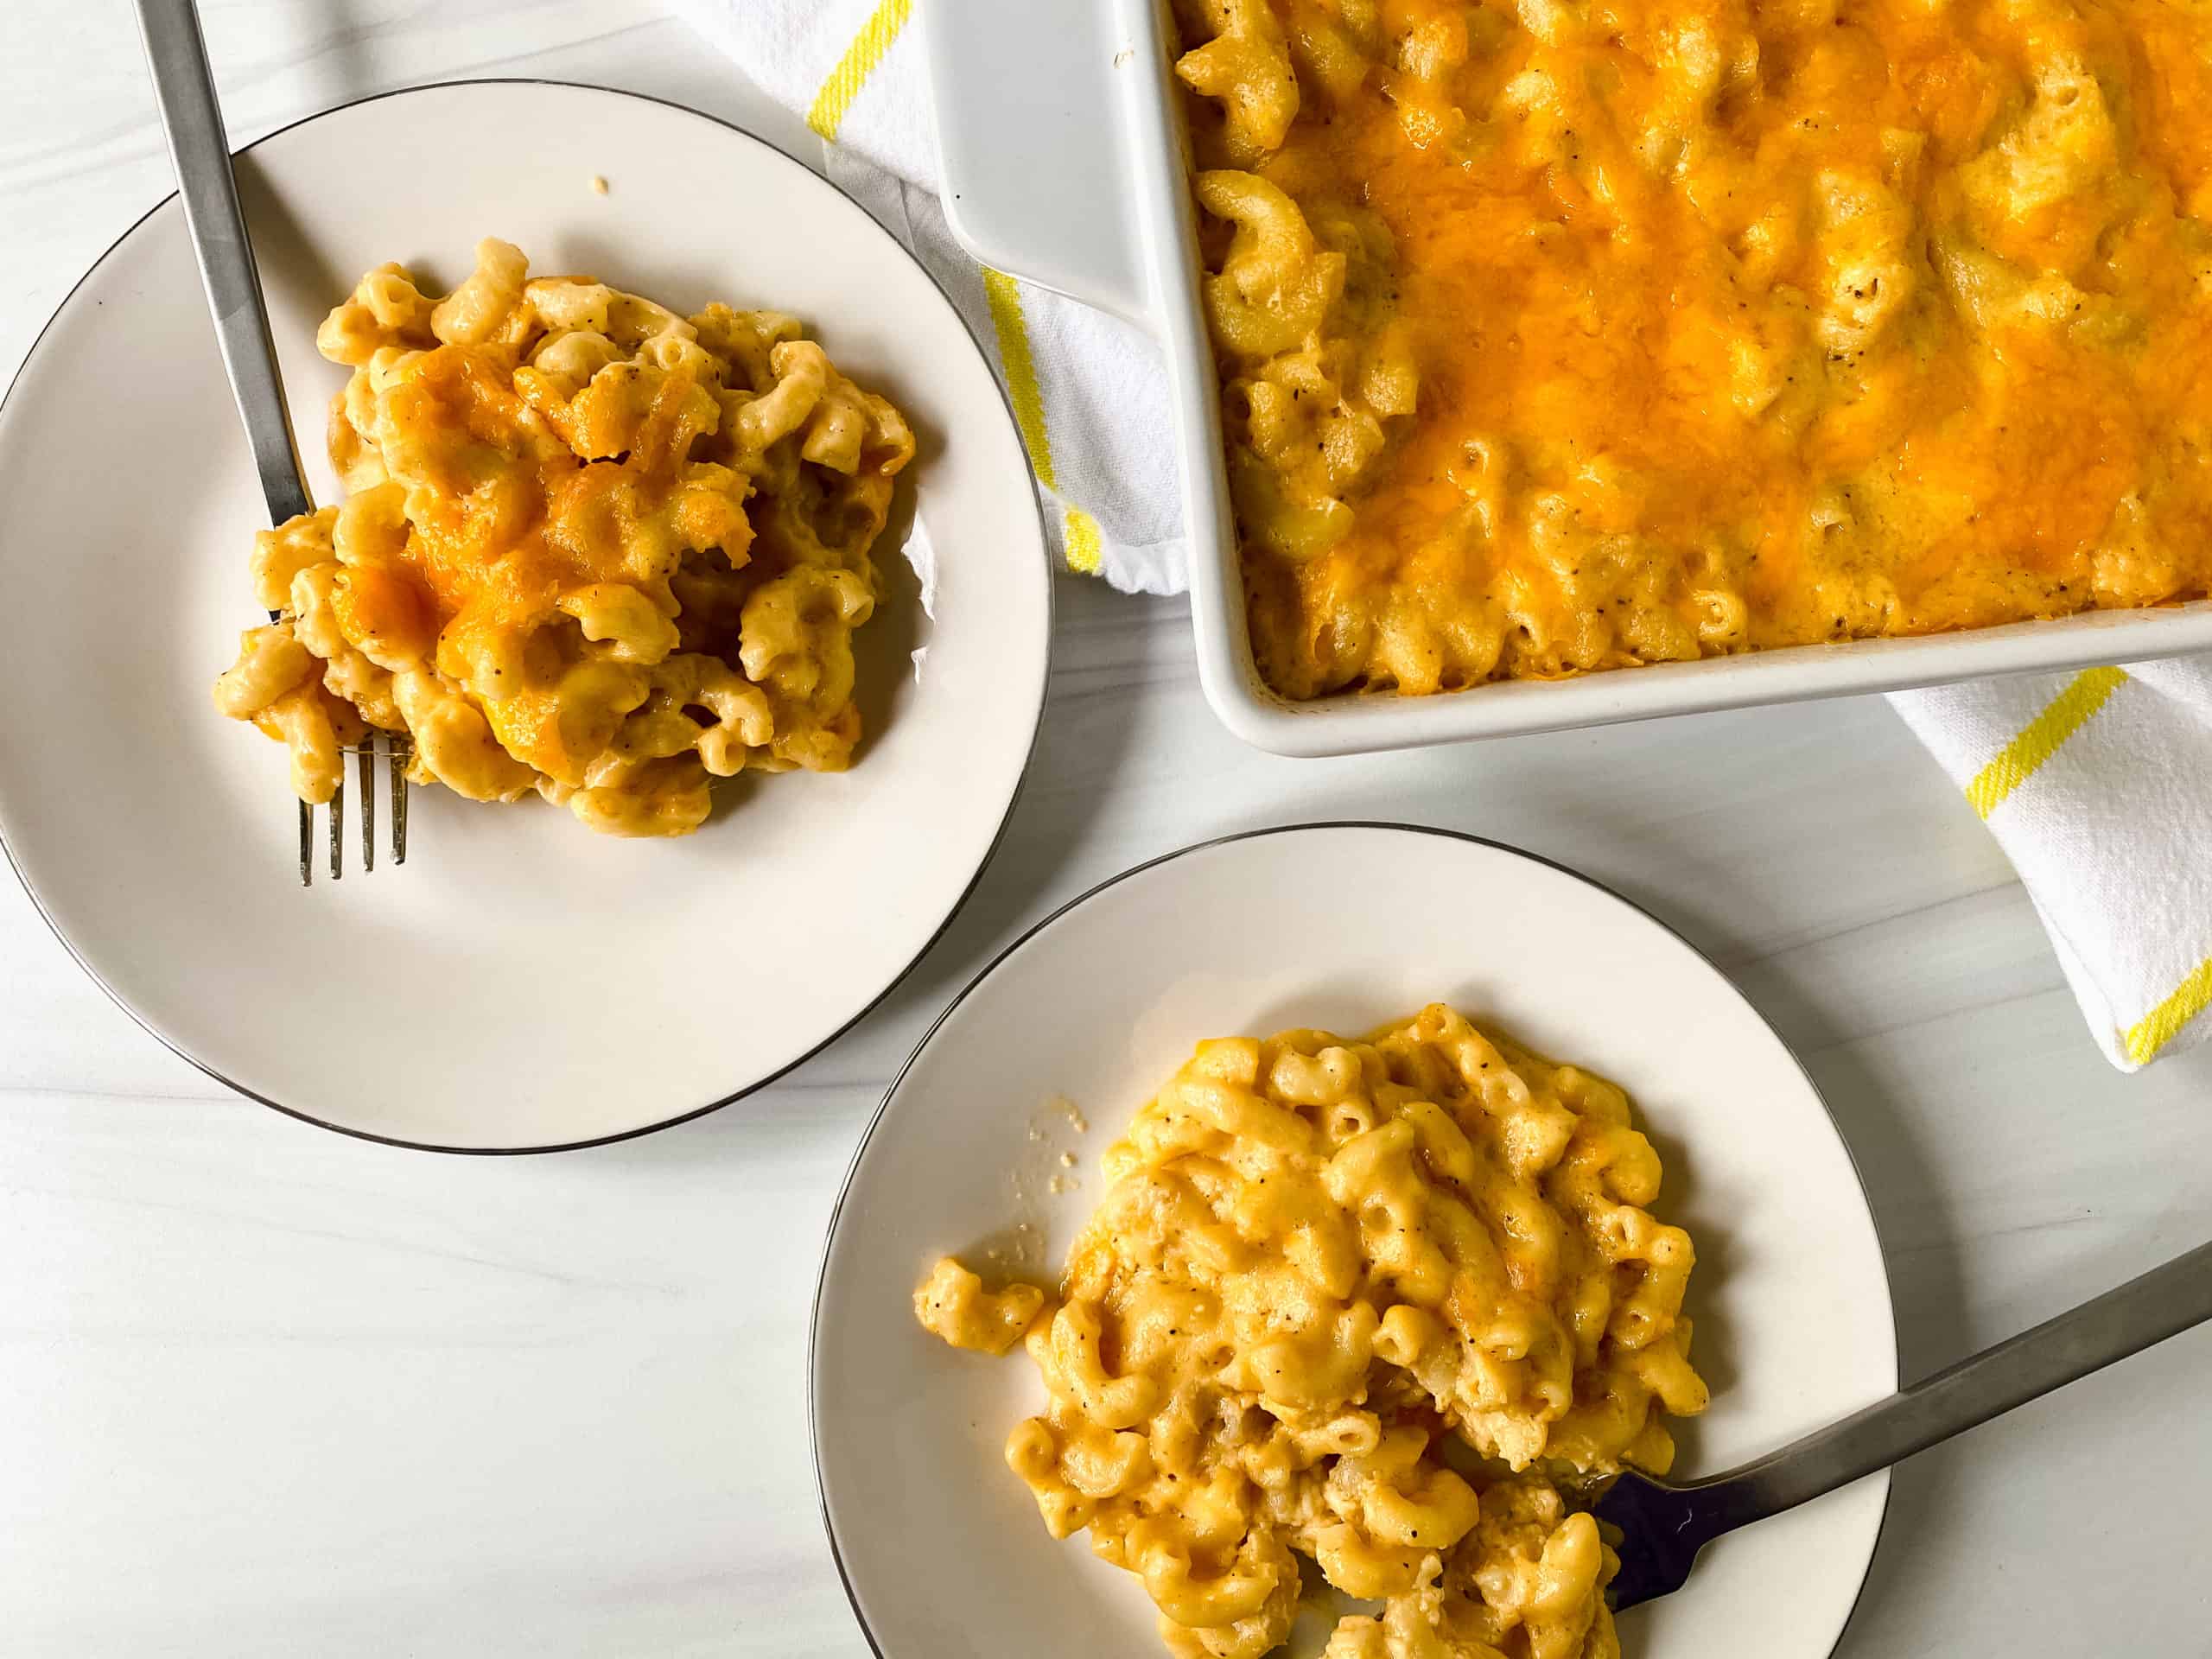 This is the creamiest, most delicious homemade macaroni and cheese recipe. Perfect whenever you need comfort food or want to delight your family.